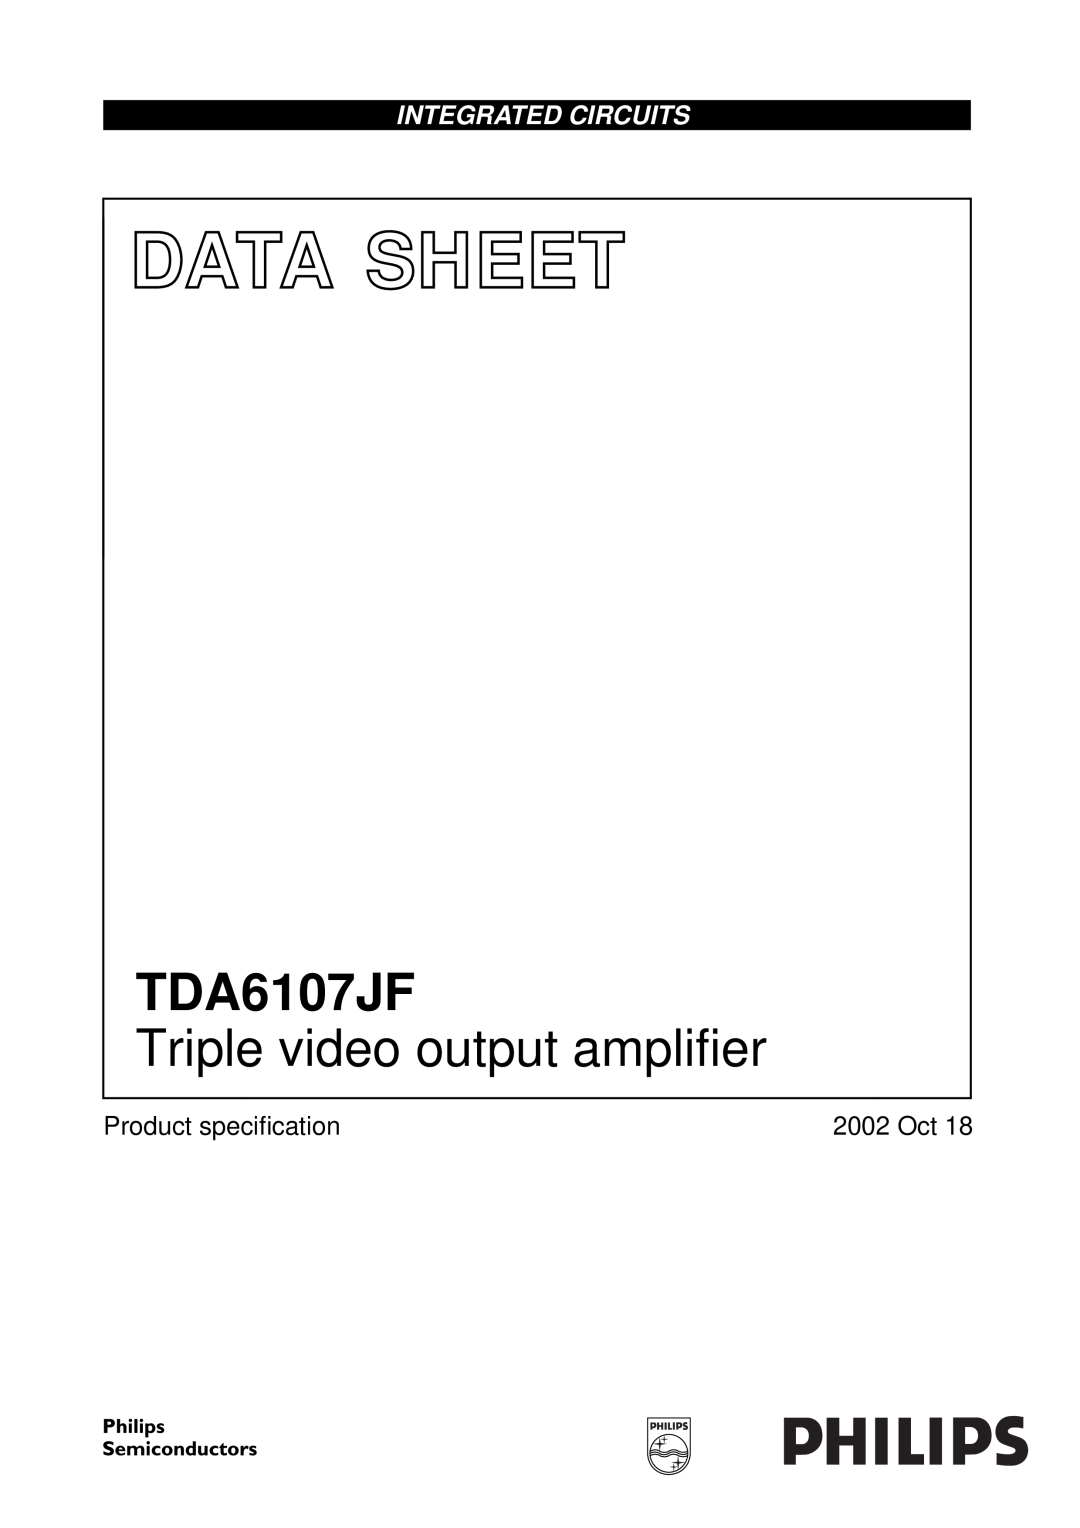 Philips TDA6107JF manual Product speciﬁcation, 2002 Oct, Data Sheet, Triple video output amplifier, Integrated Circuits 